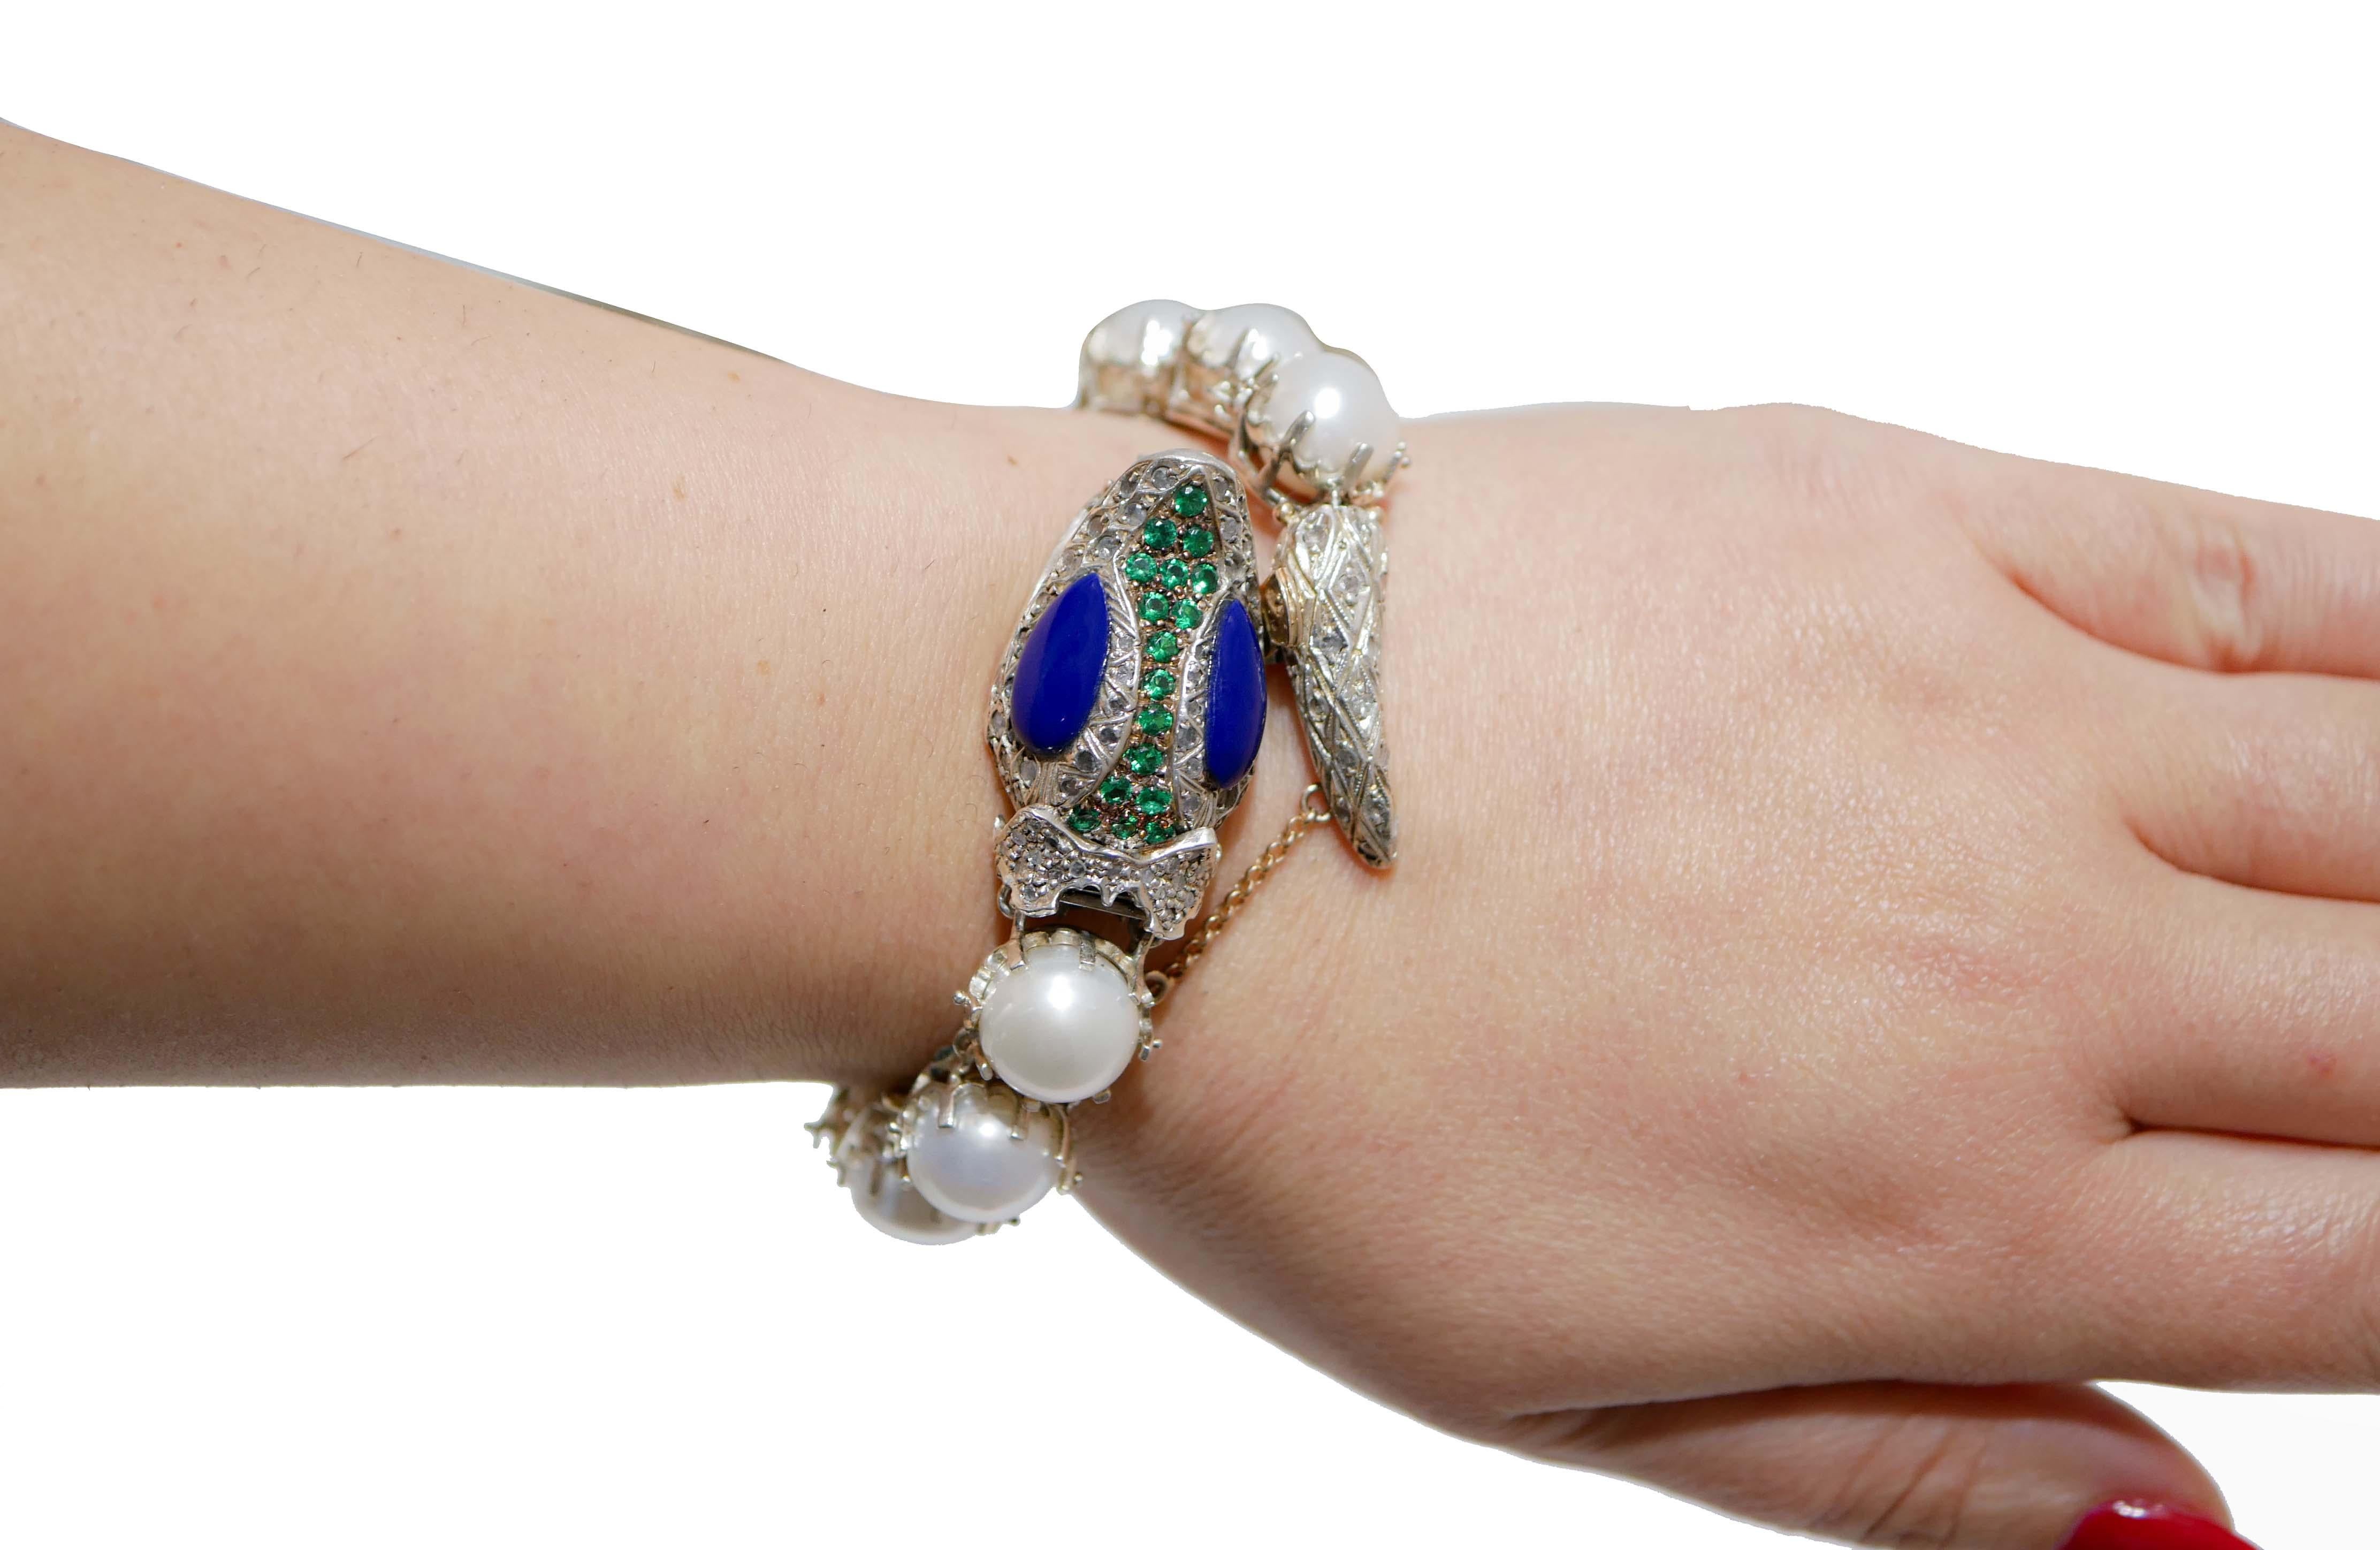 Mixed Cut Hydrothermal Spinel, Diamonds, Pearls, Lapis, Rose Gold and Silver  Bracelet. For Sale